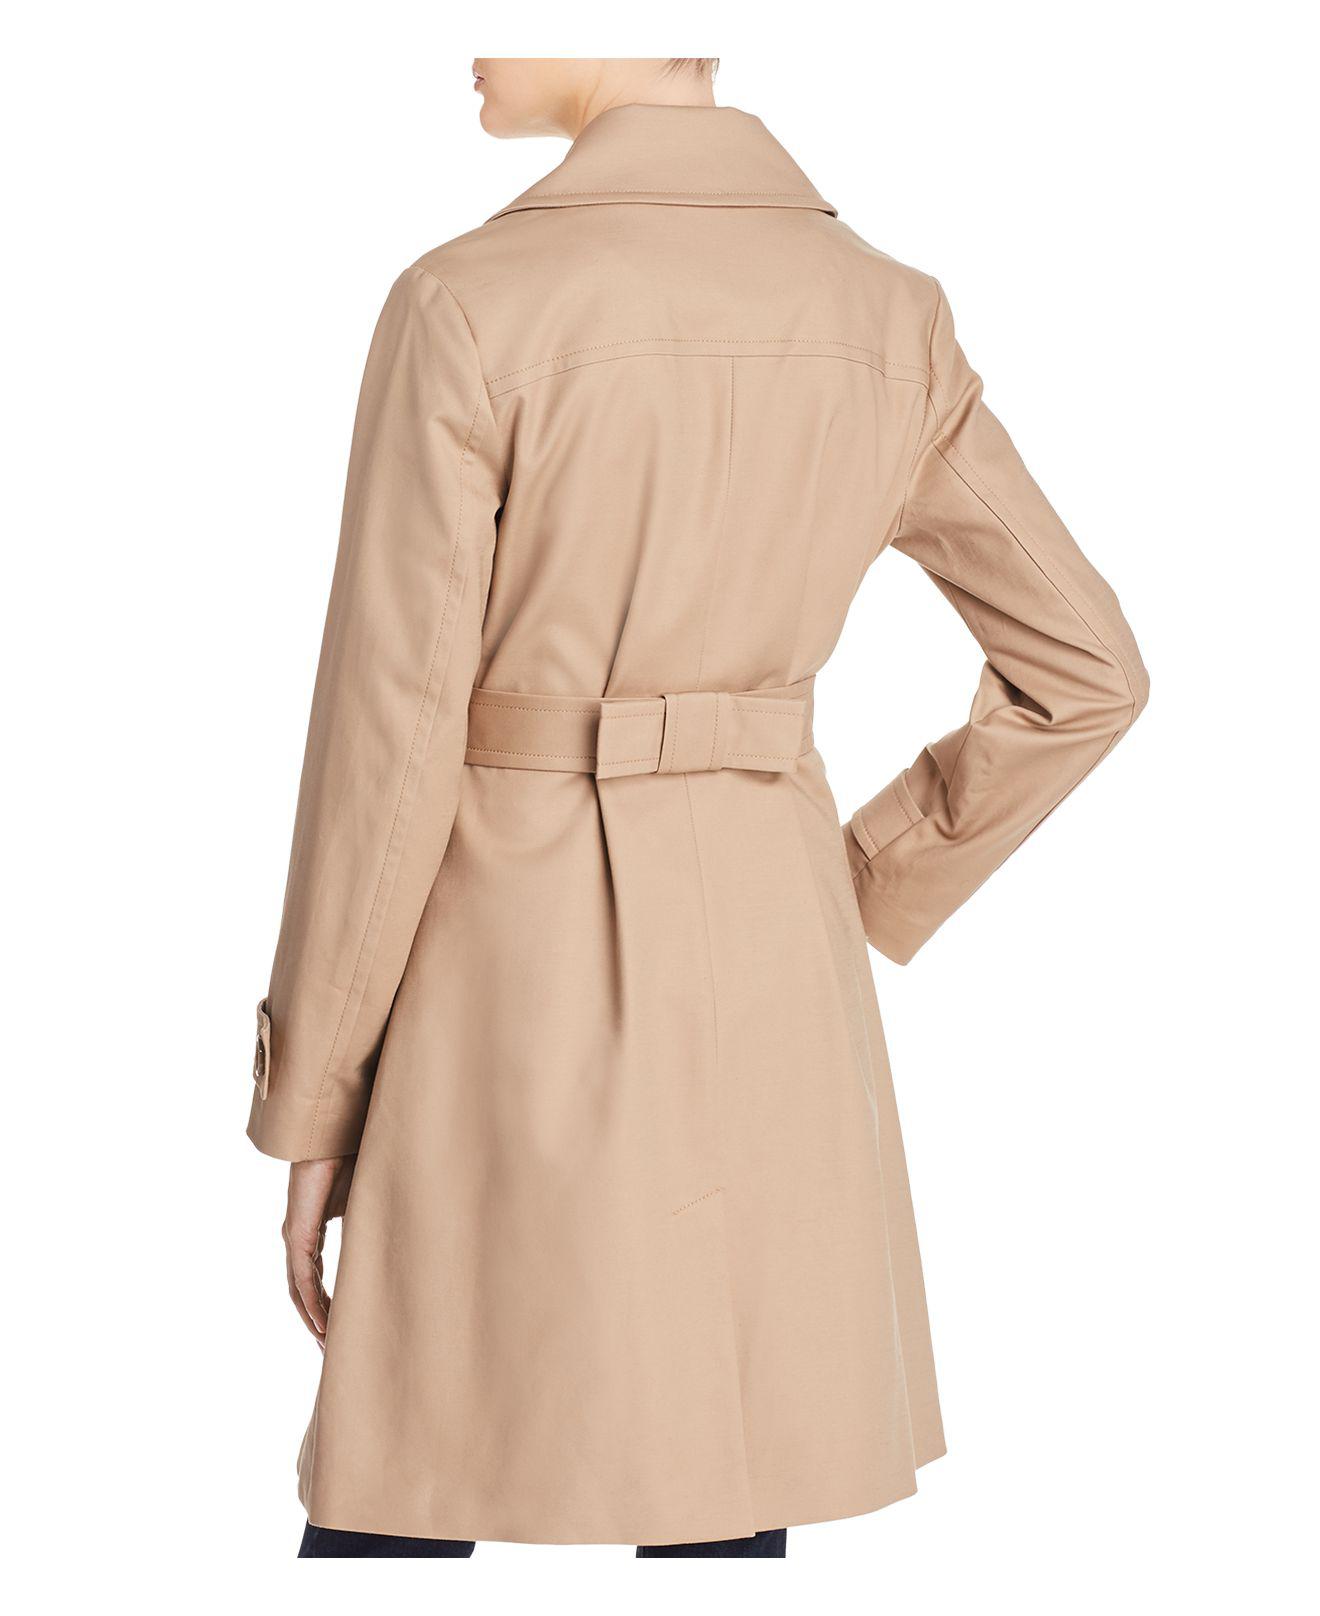 Kate Spade Double-breasted Bow Back Trench Coat in Caramel (Natural) - Lyst